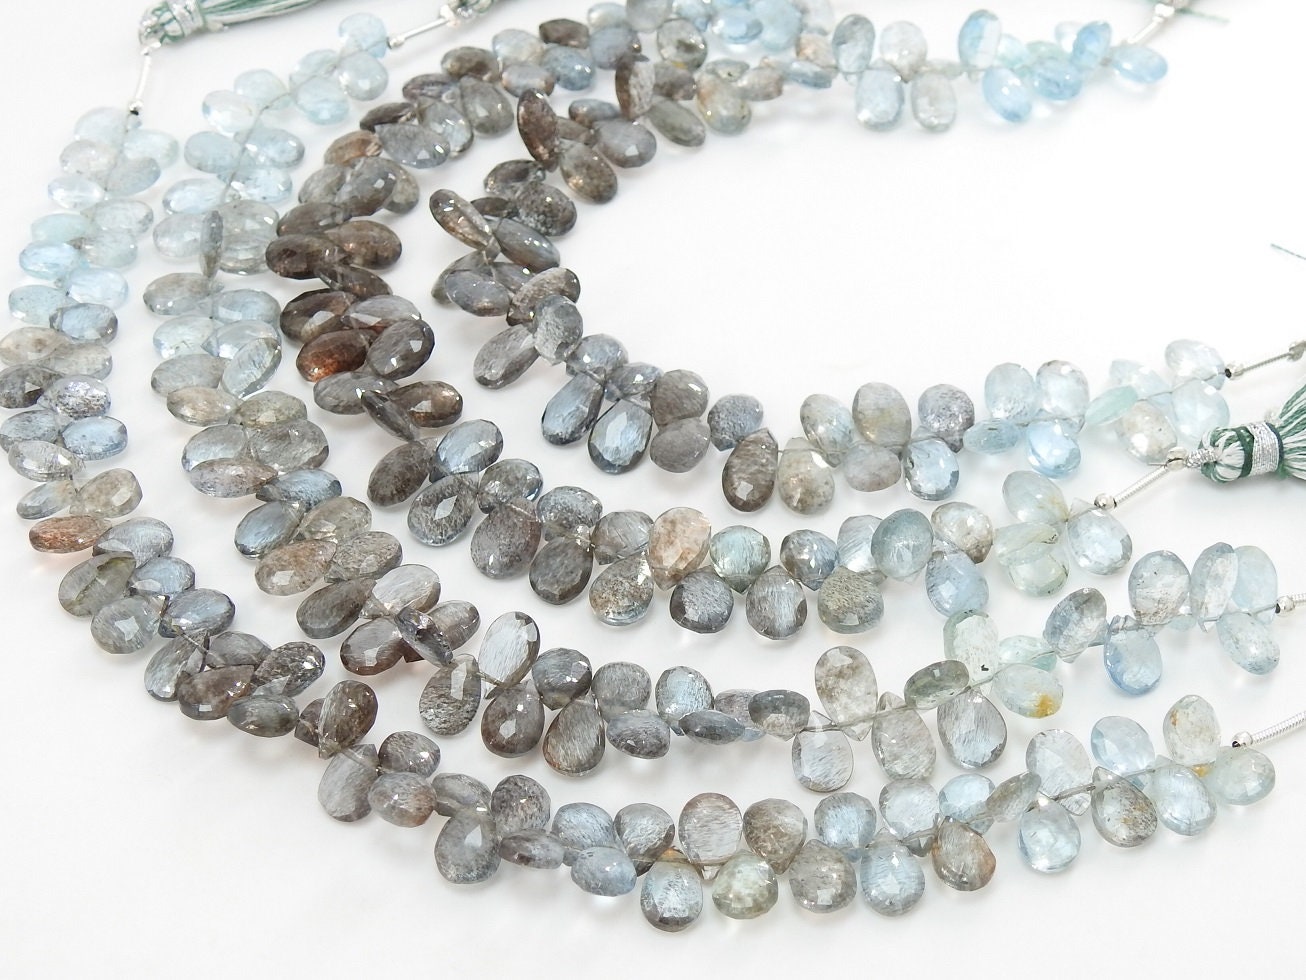 Moss Aquamarine Faceted Teardrop,Multi Shaded,Loose Bead 8Inch 9X6To8X5MM Approx Wholesale Price,New Arrival,100%Natural BB(BR4) | Save 33% - Rajasthan Living 11